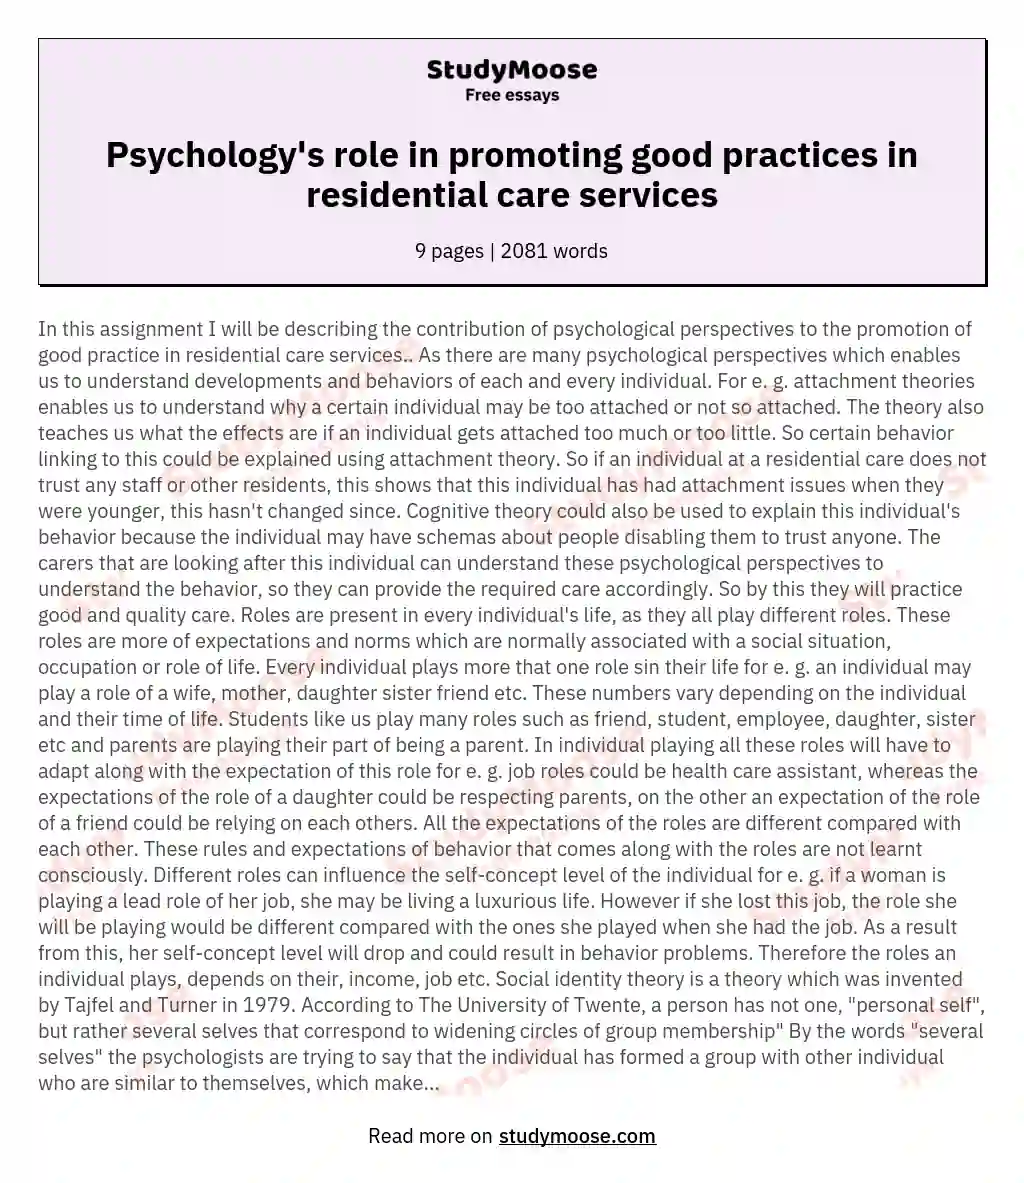 Psychology's role in promoting good practices in residential care services essay